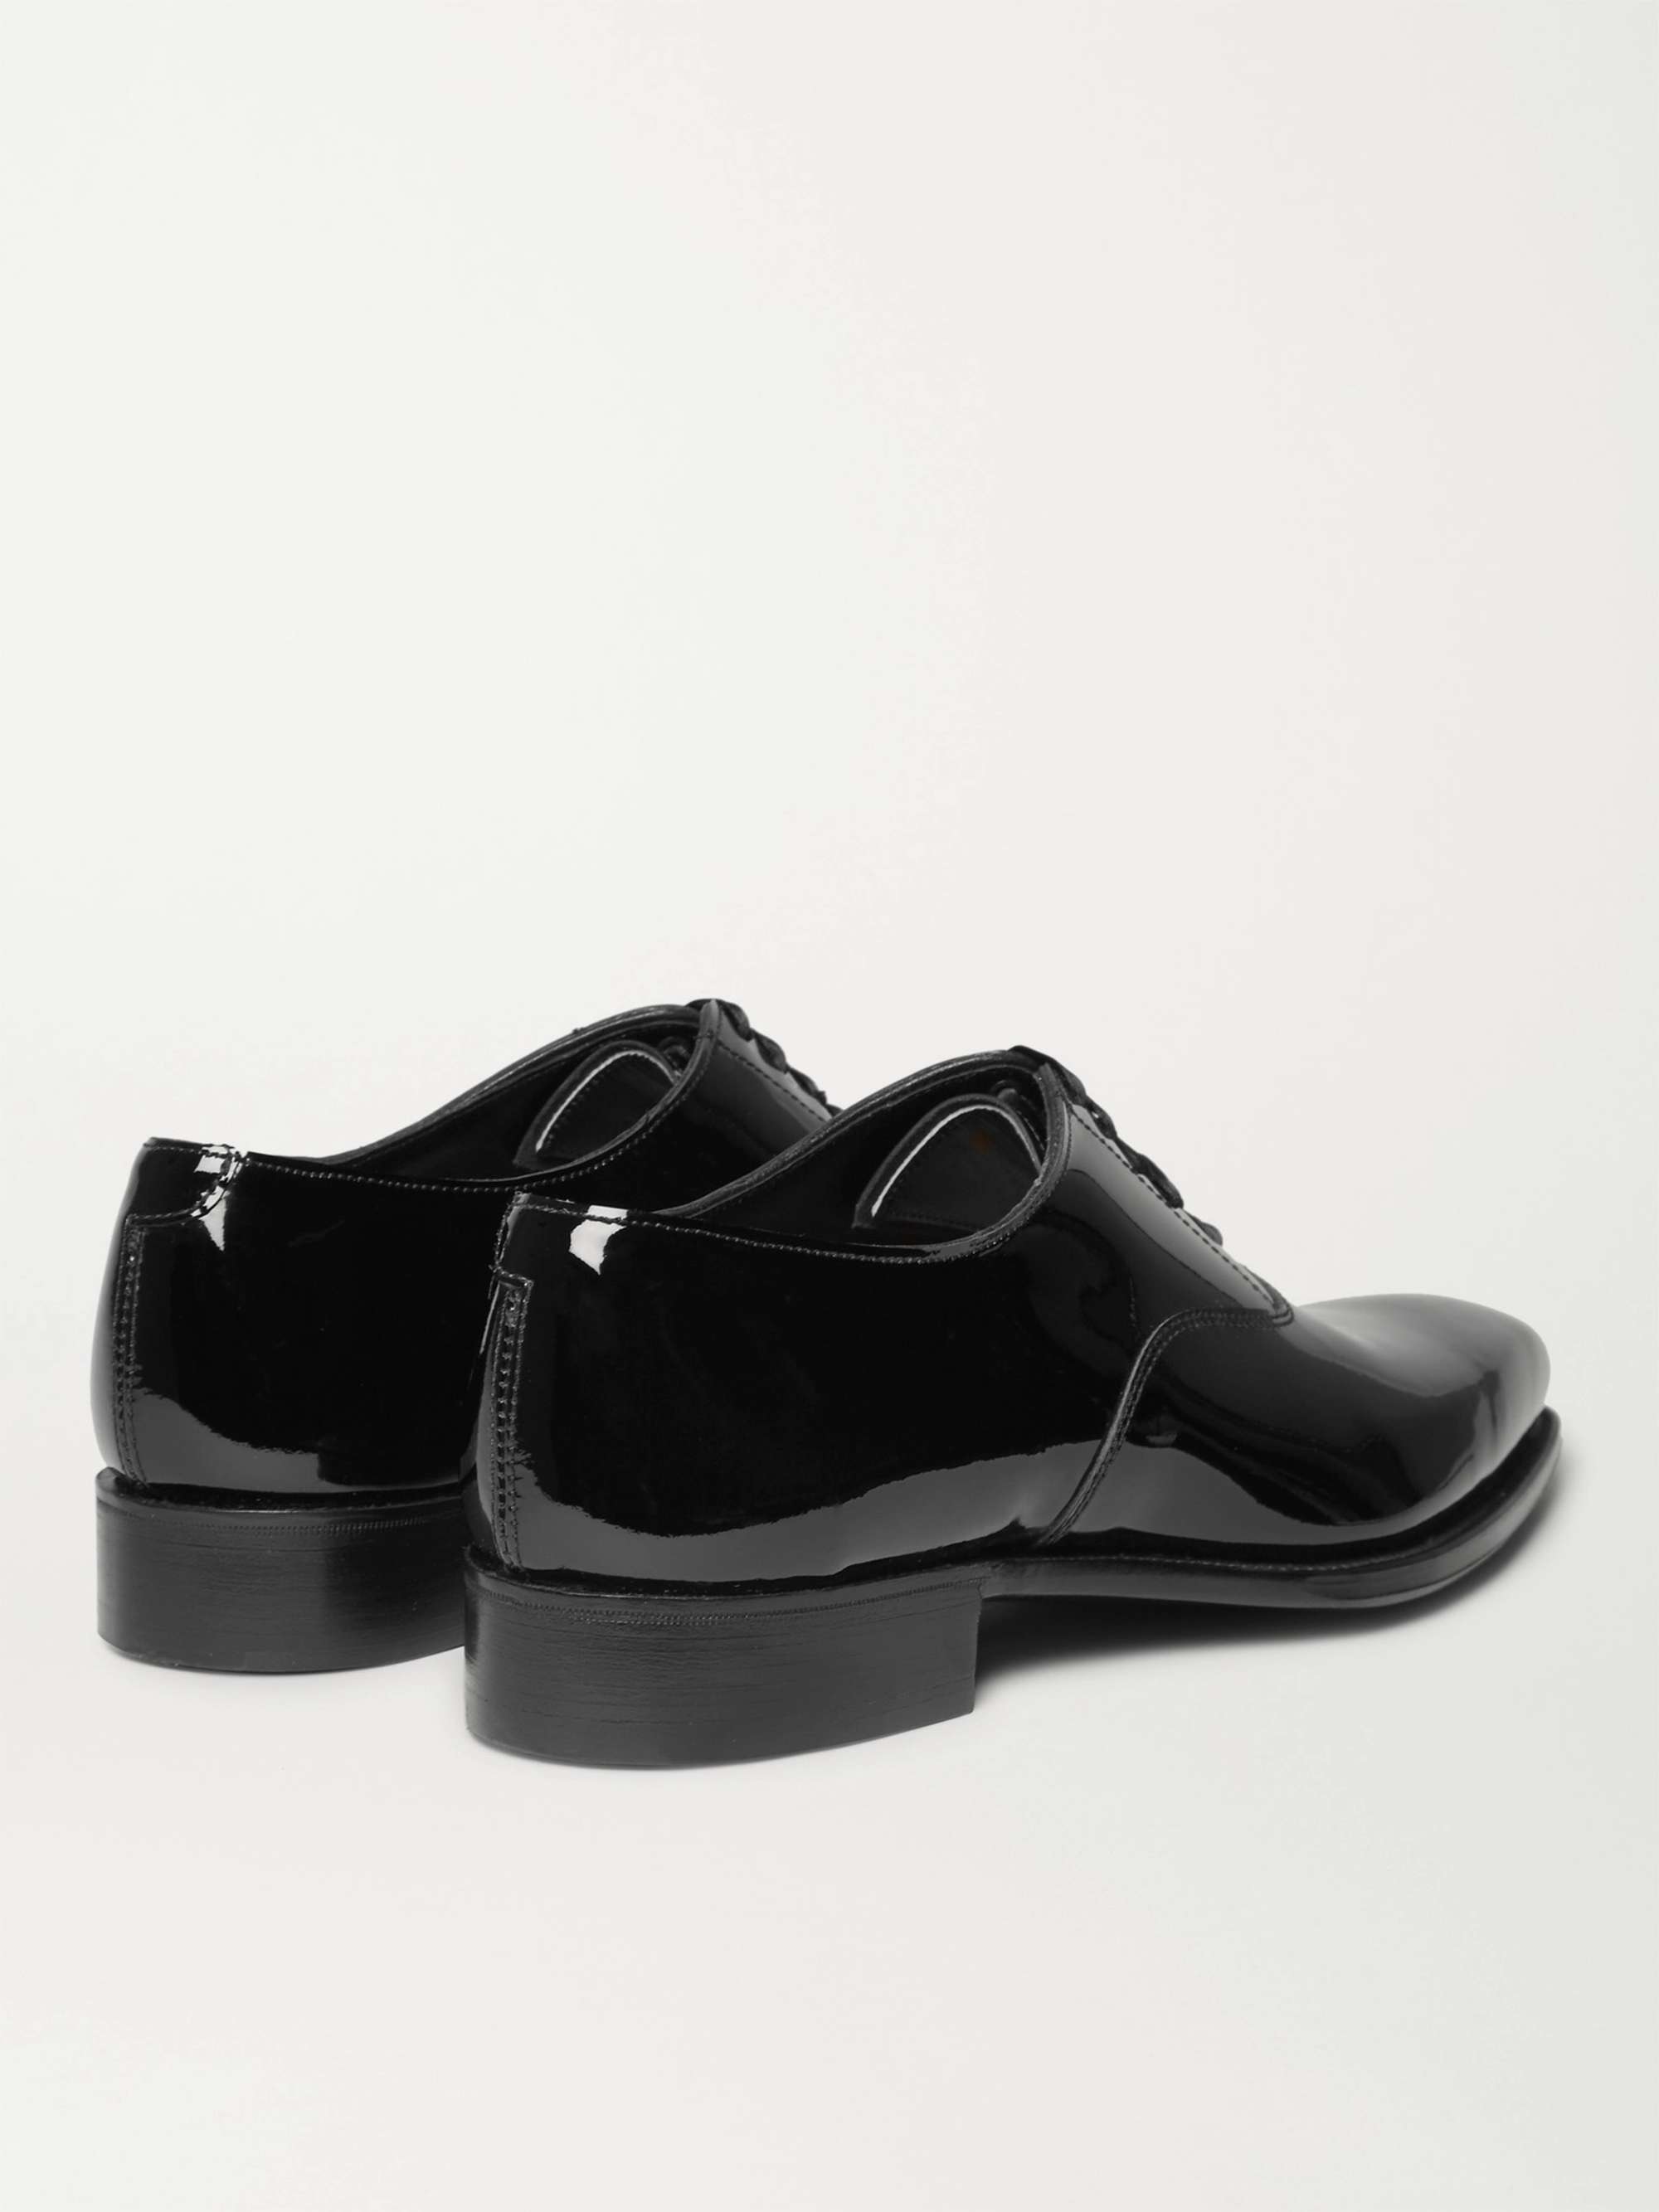 KINGSMAN + George Cleverley Patent-Leather Oxford Shoes | MR PORTER